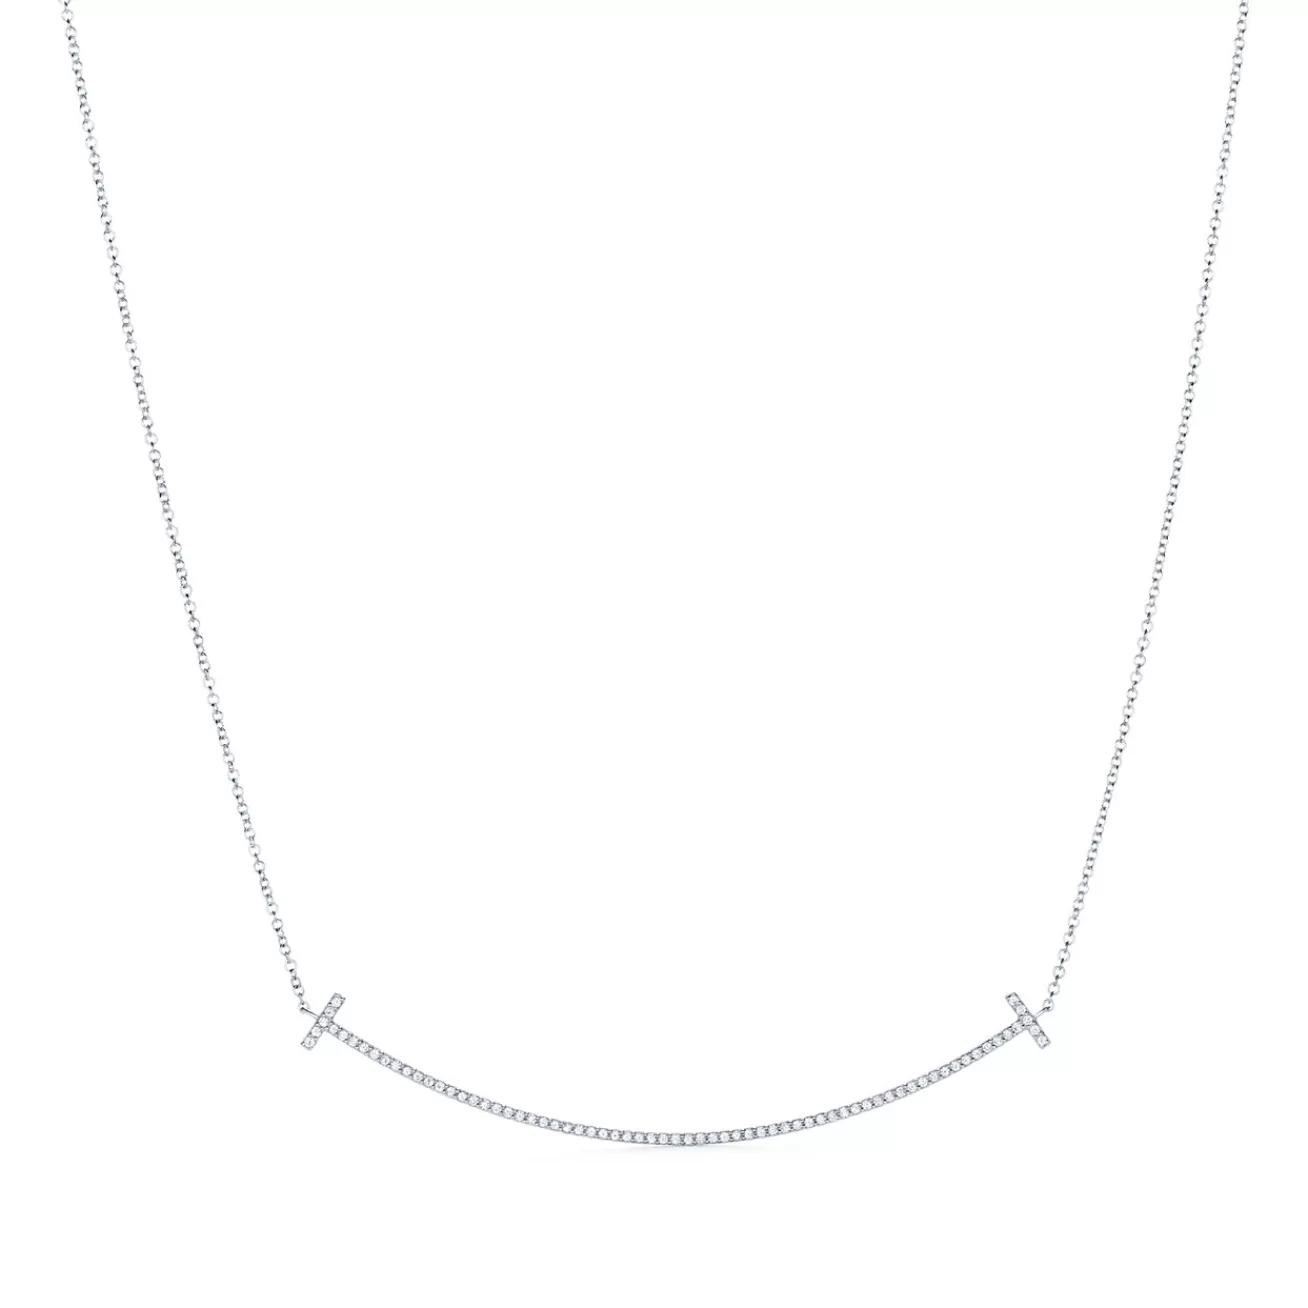 Tiffany & Co. Tiffany T Smile Pendant in White Gold with Diamonds, Large | ^ Necklaces & Pendants | Men's Jewelry